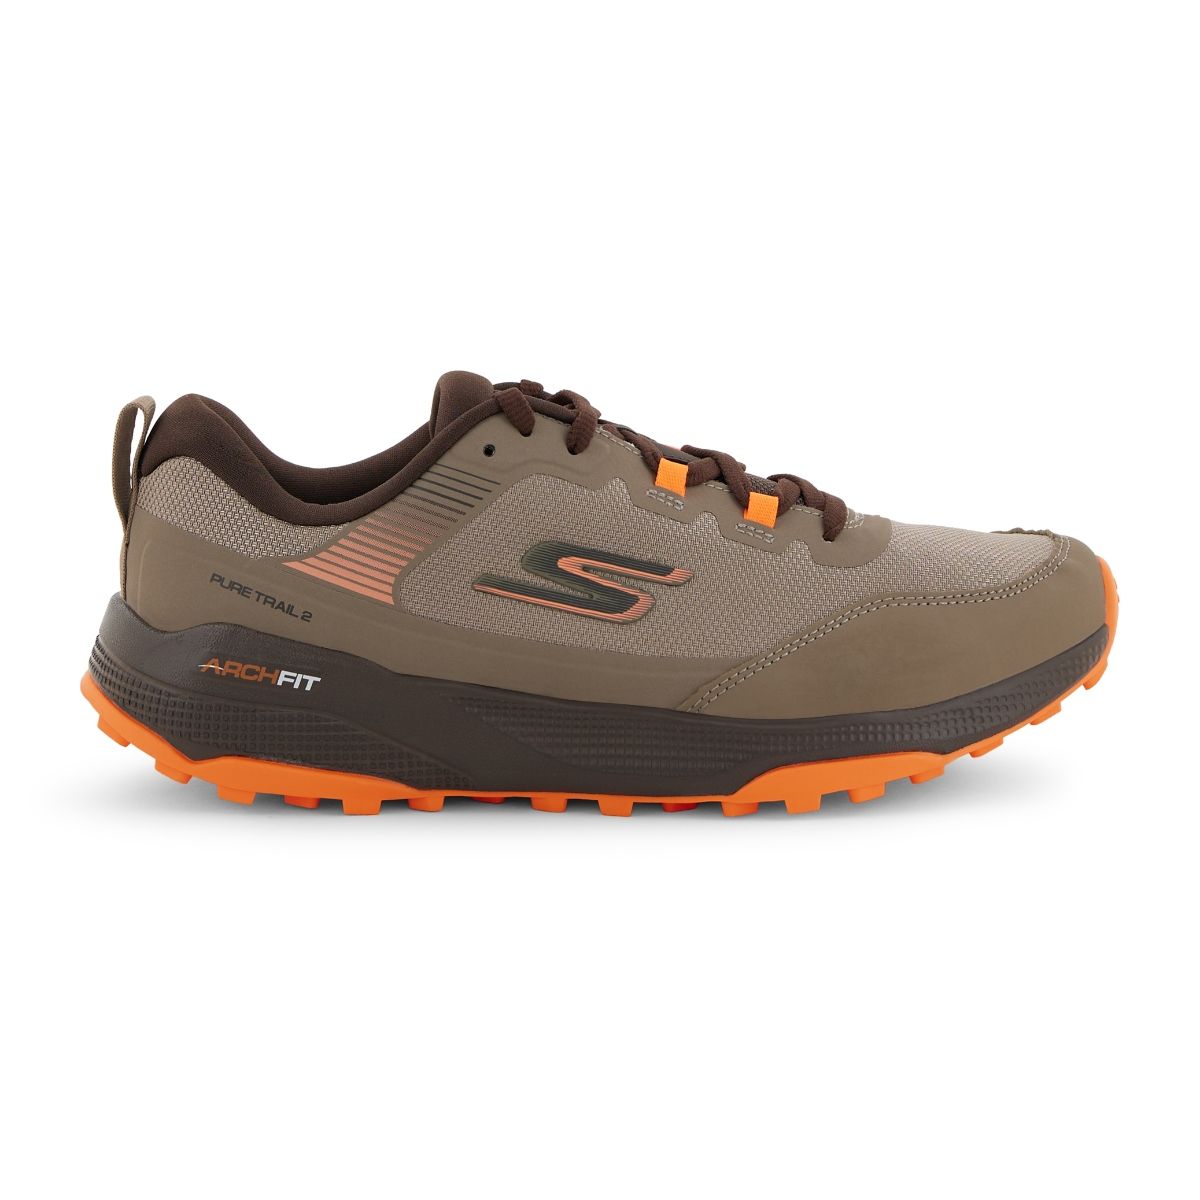 SKECHERS Go Run Trail 2 - Valley Brown Running Lace Up: Buy SKECHERS Go Run Pure Trail 2 - Valley Brown Running Lace Up Online at Best Price in India | NykaaMan